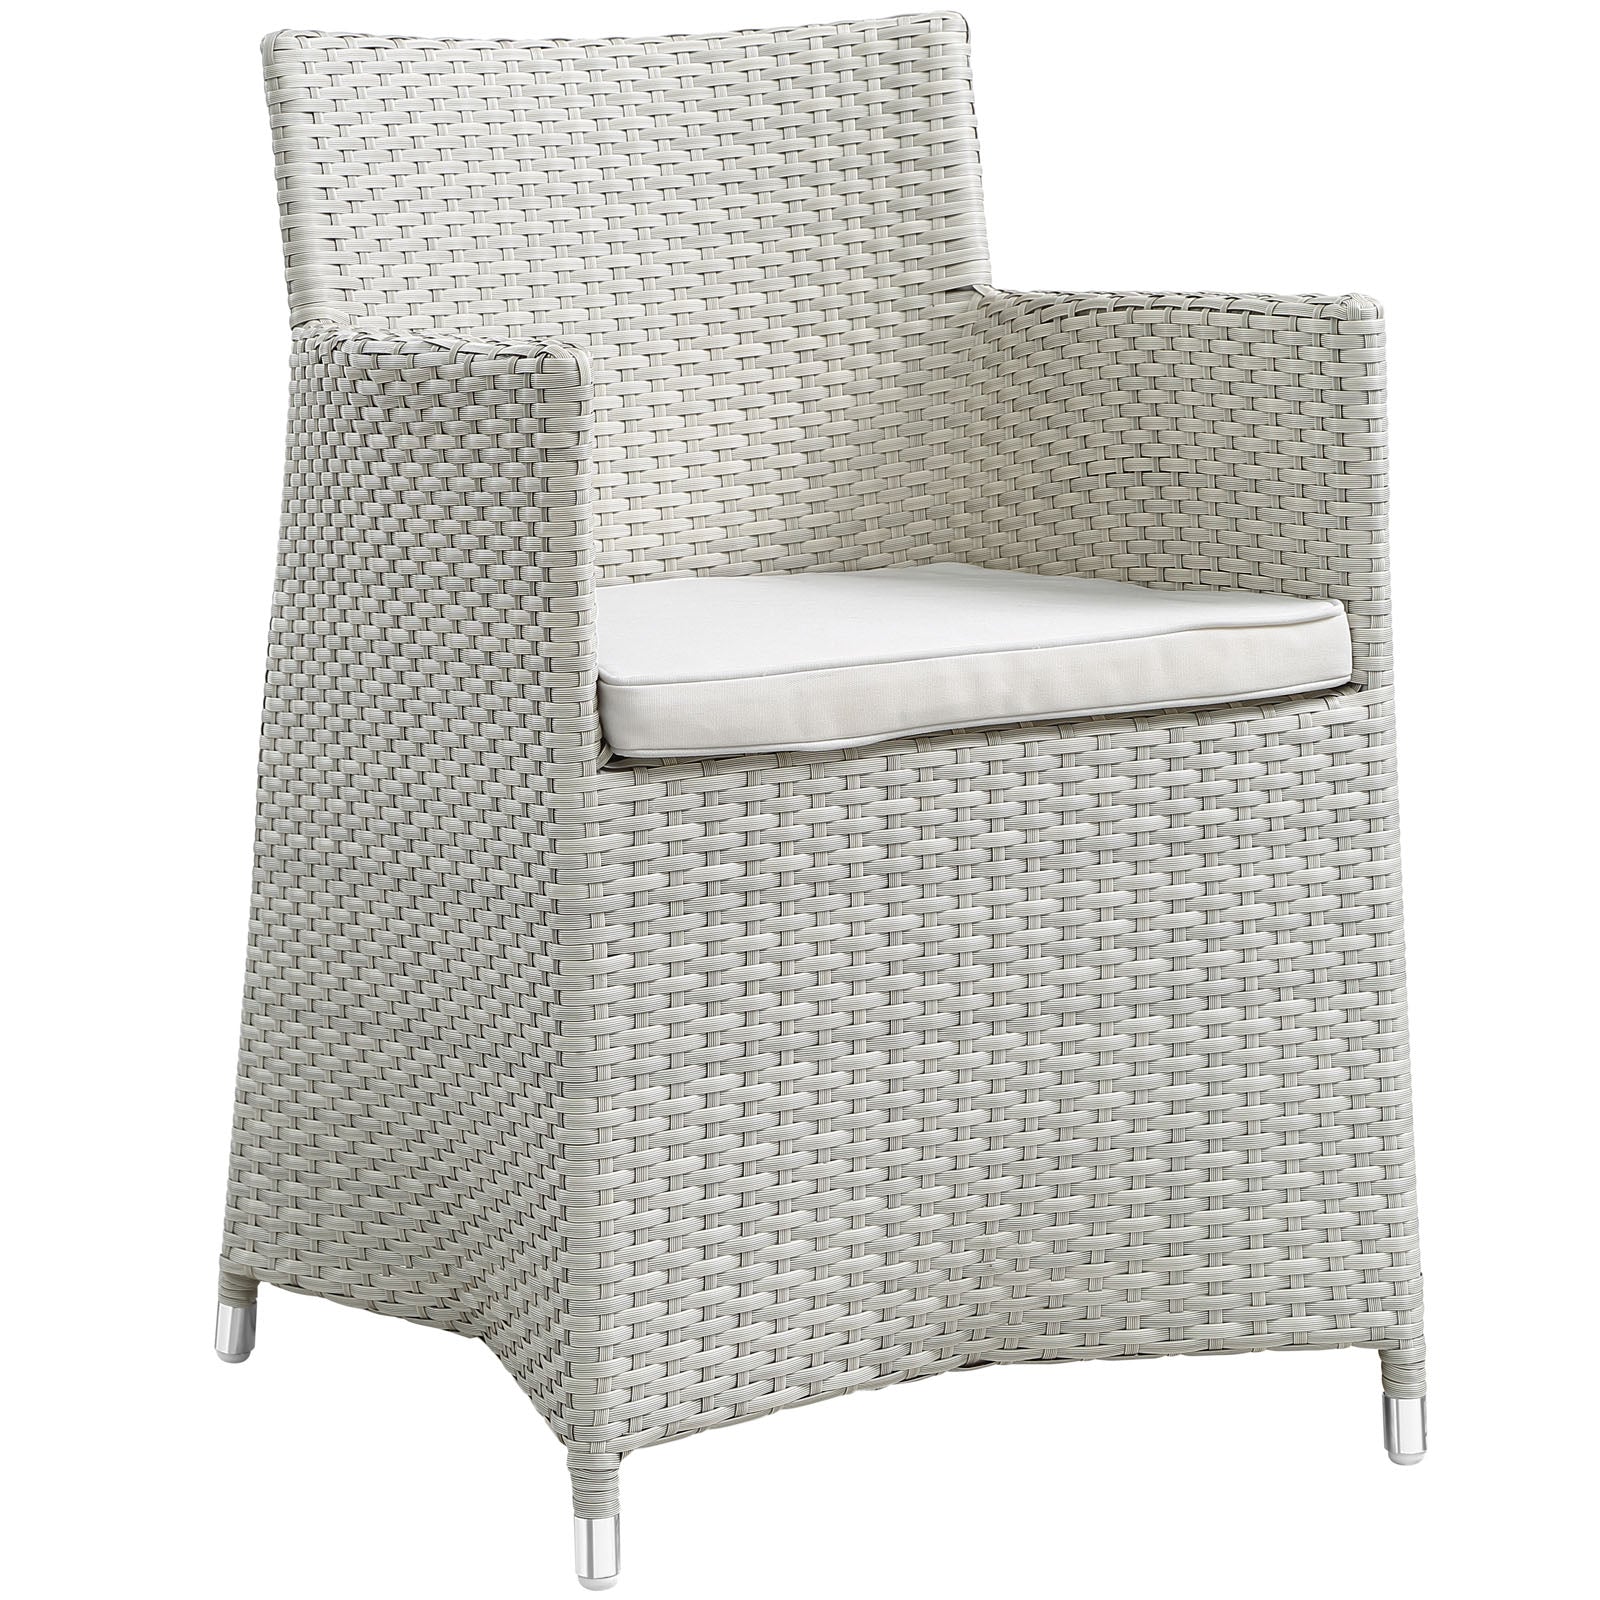 Modway Outdoor Dining Chairs - Junction Armchair Outdoor Patio Wicker Set of 2 Gray White